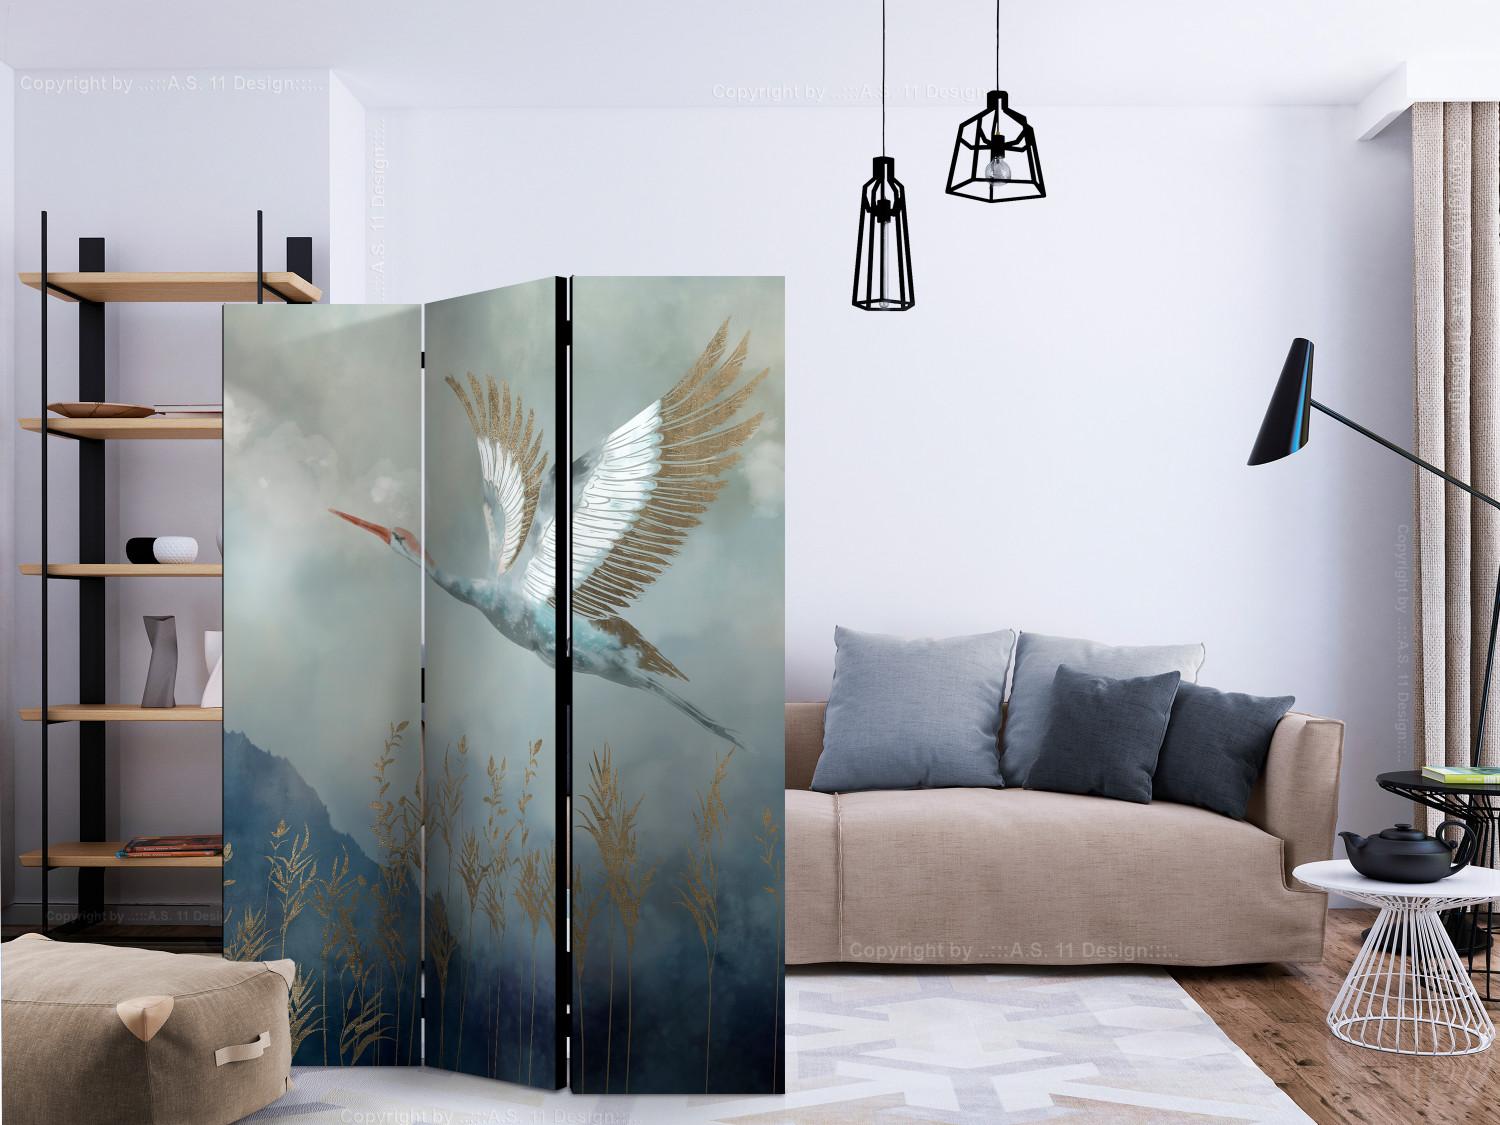 Room Divider Heron in Flight (3-piece) - Colorful bird against mountain and bright clouds backdrop